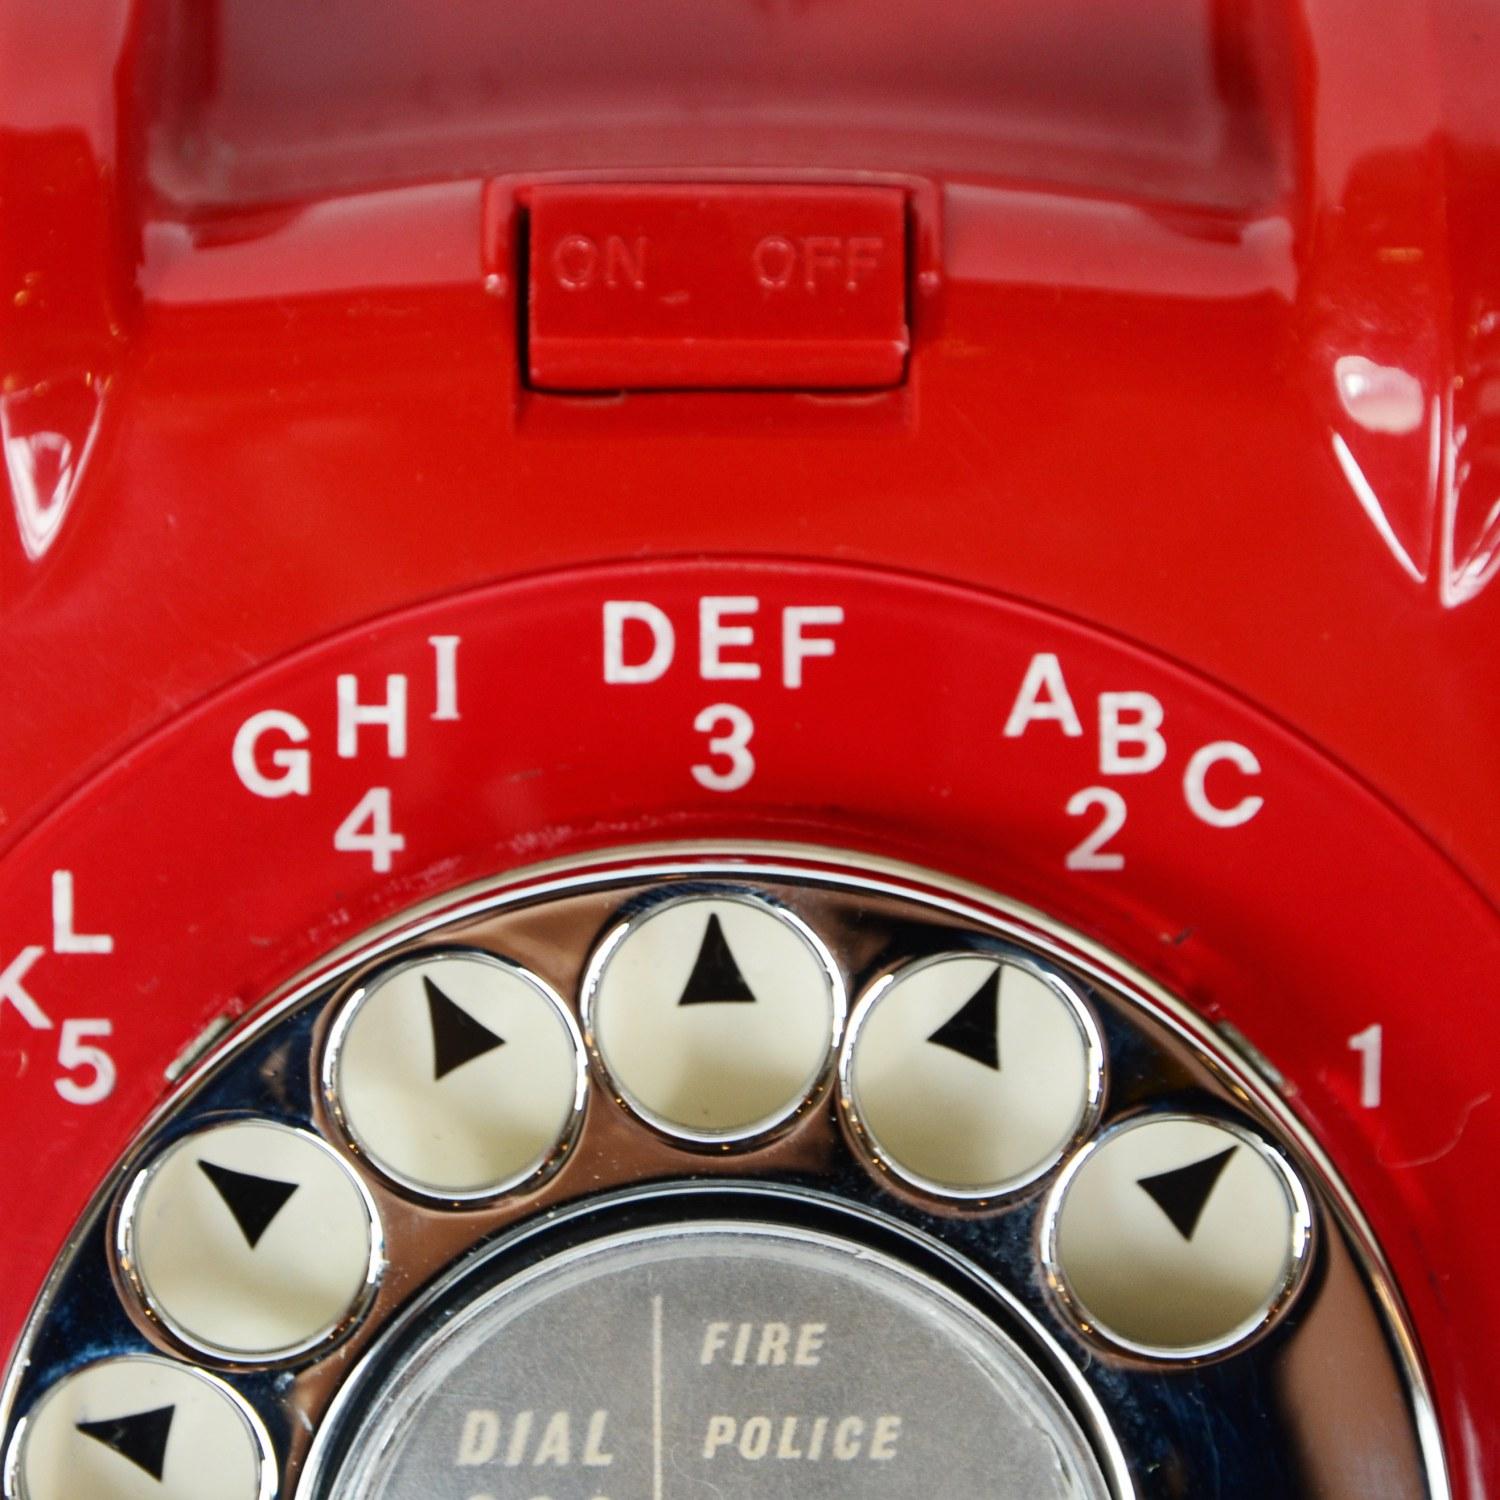 Original Red Lacquered GPO Model 706L Telephone Full Working Order 1